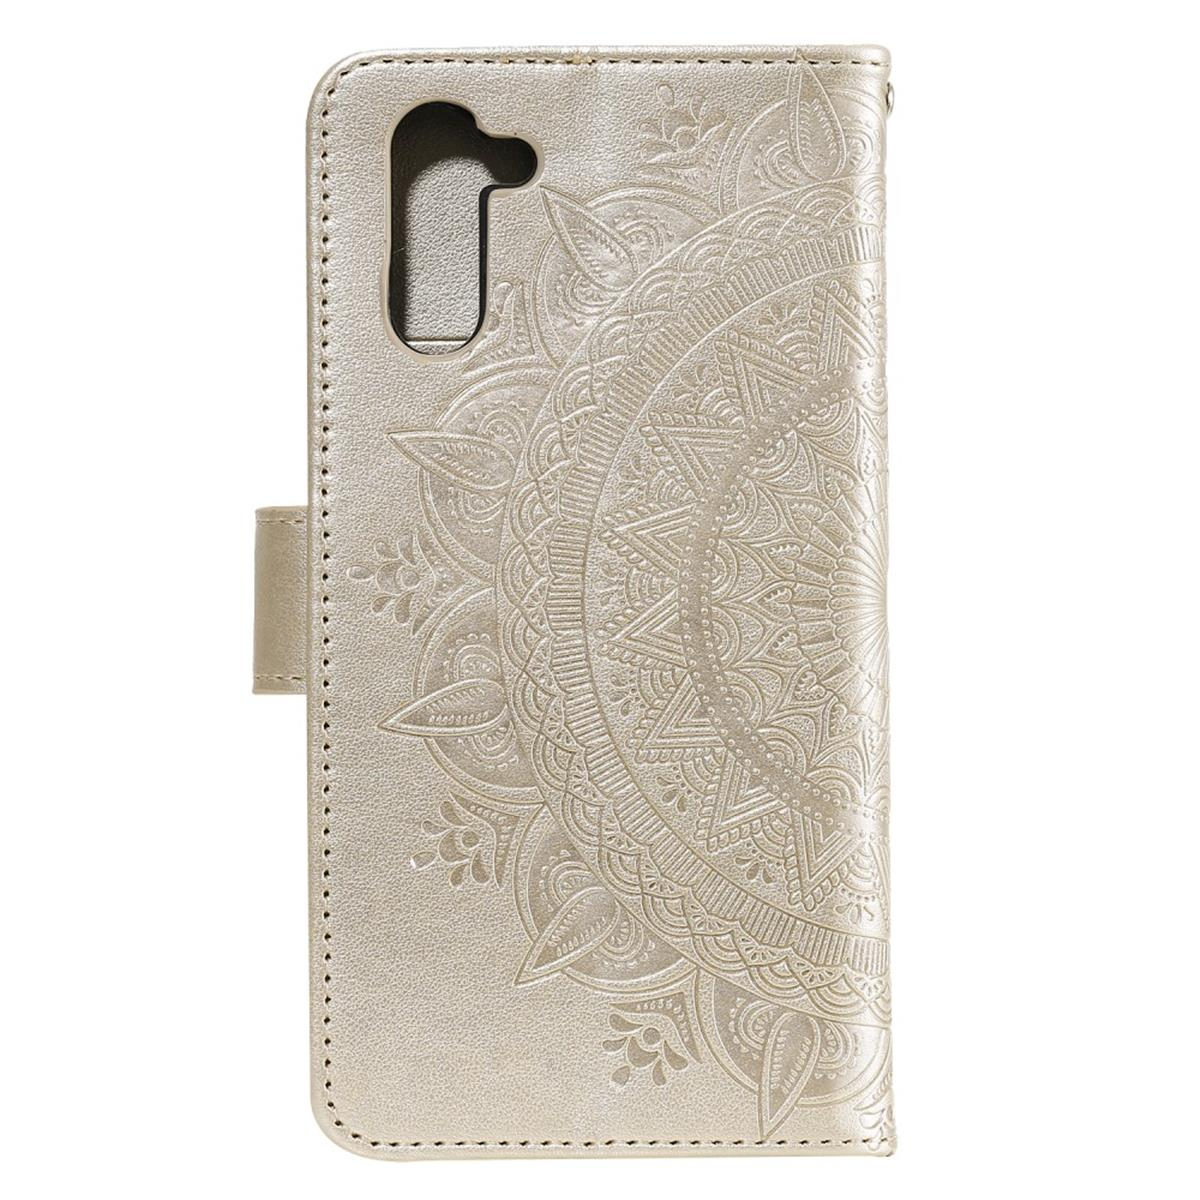 Mandala Muster, Bookcover, mit Samsung, COVERKINGZ Gold Note10, Galaxy Klapphülle